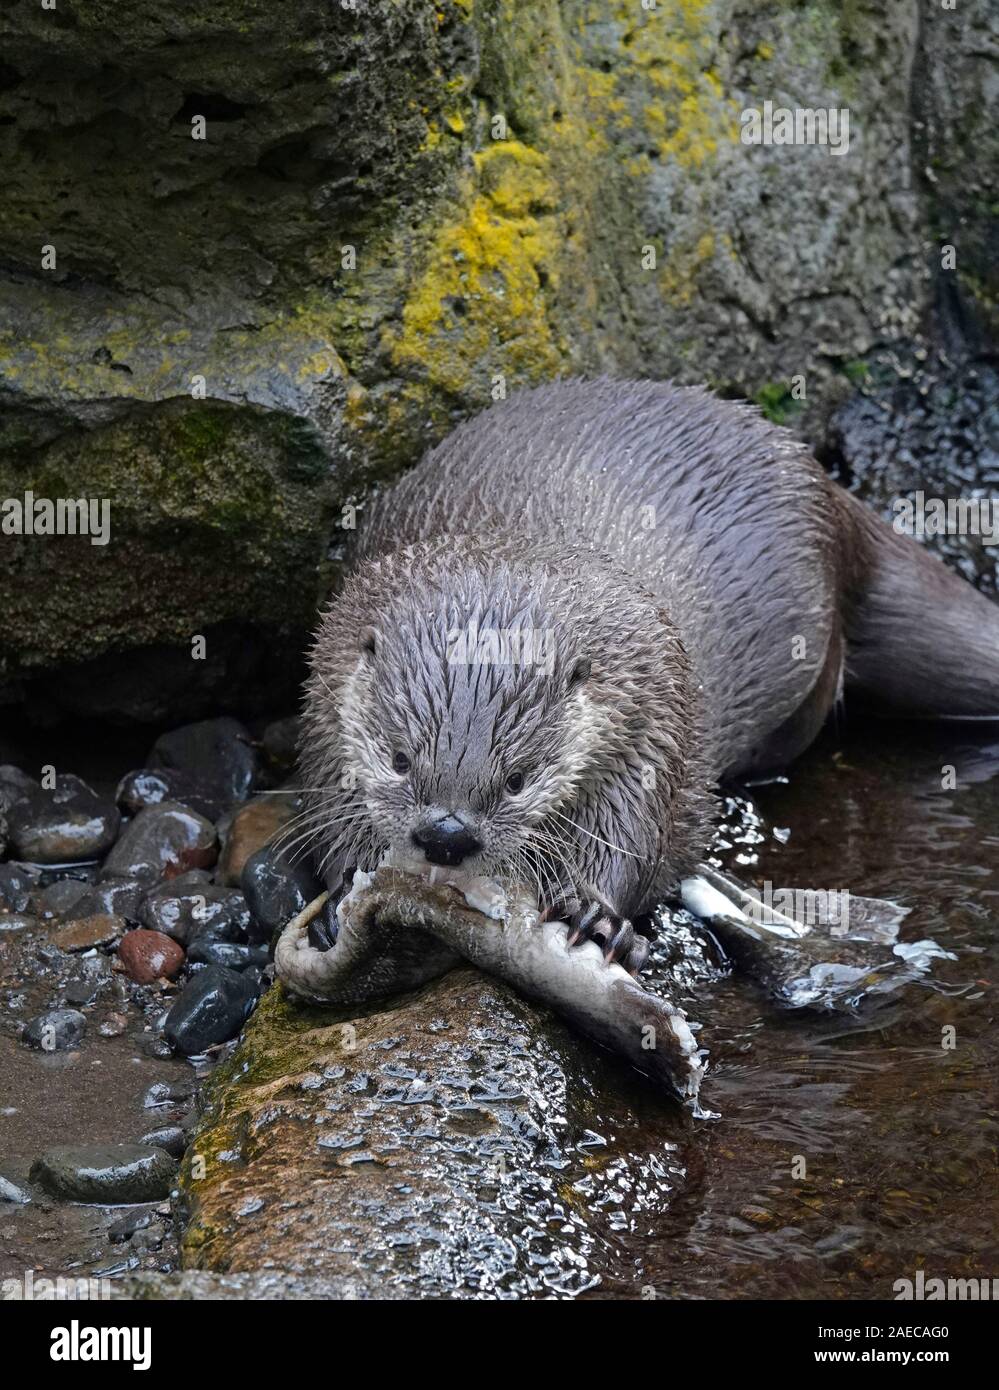 A North American River Otter, Lontra canadensis, devouring a large trout on a river in the Cascade Mountains of central Oregon. Stock Photo